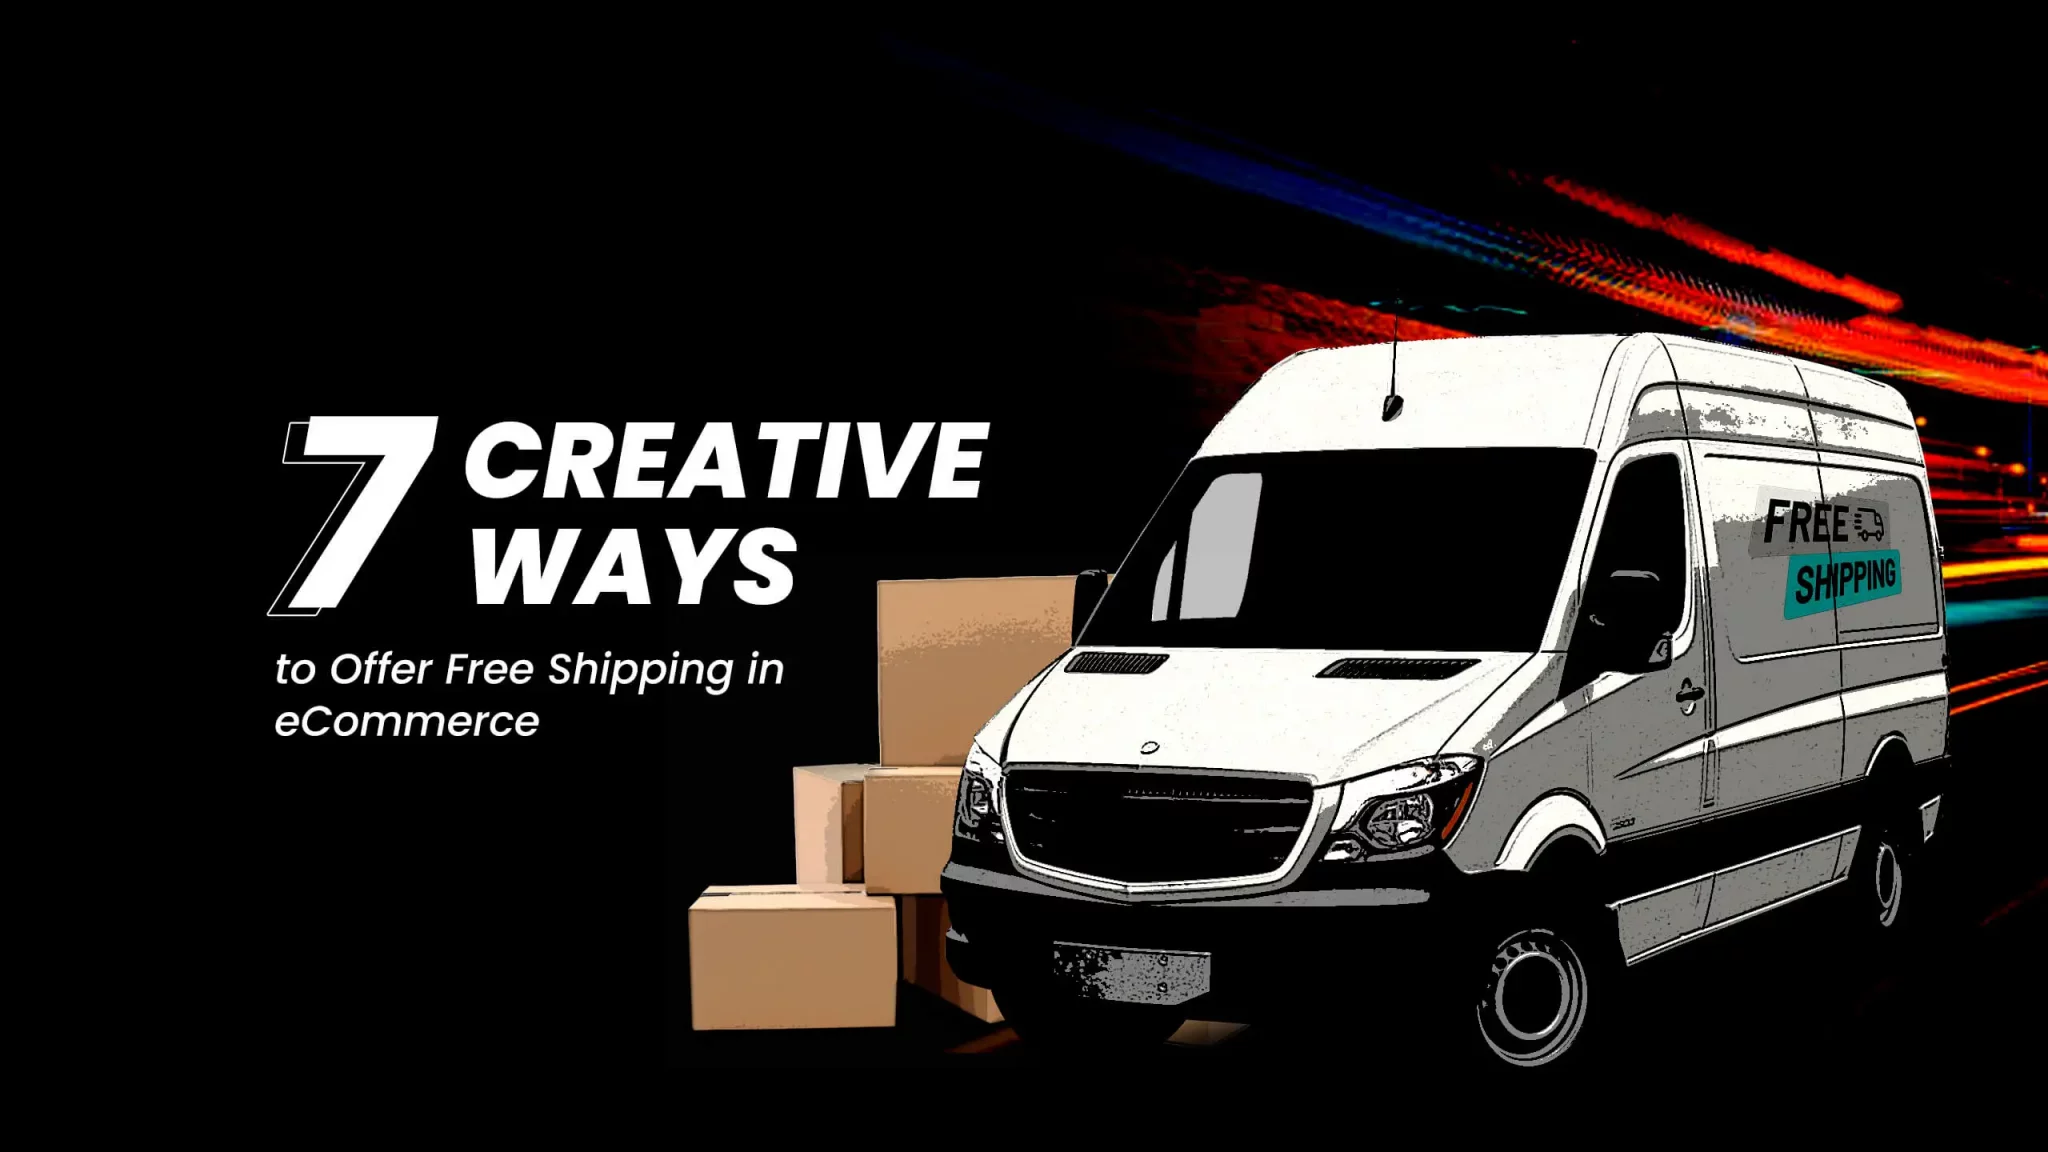 7 Creative Ways to Offer Free Shipping in eCommerce